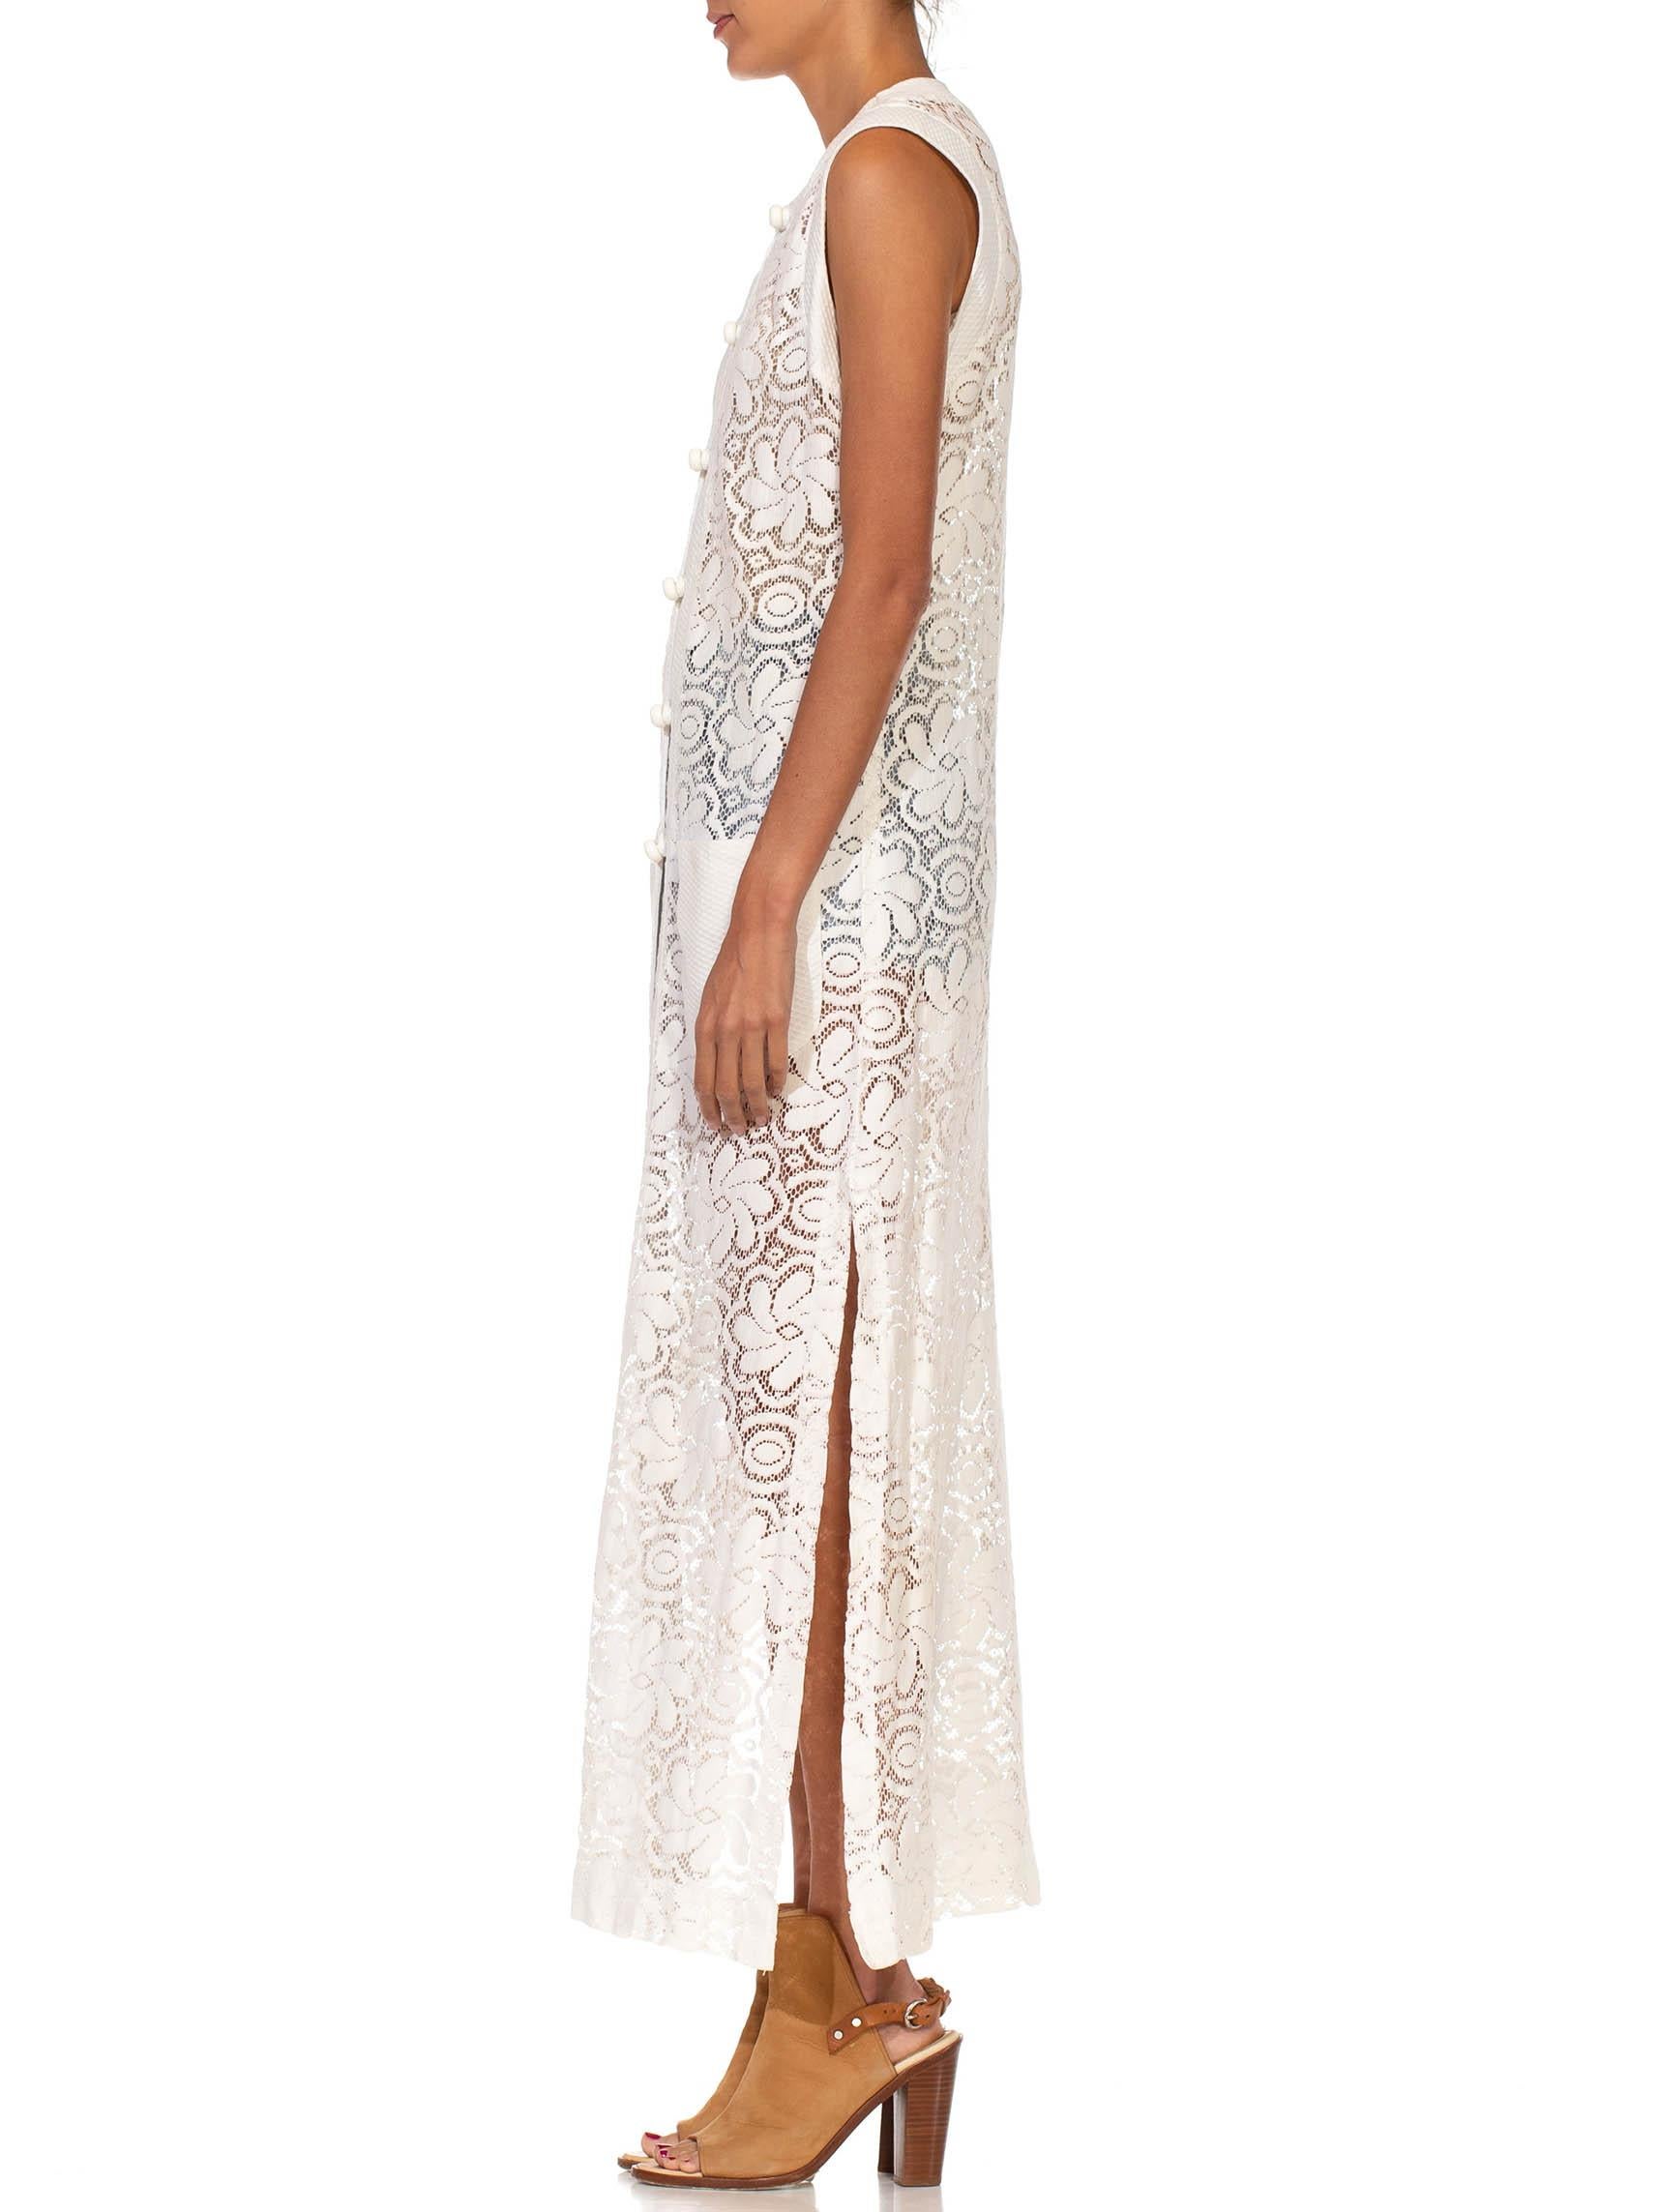 white lace duster